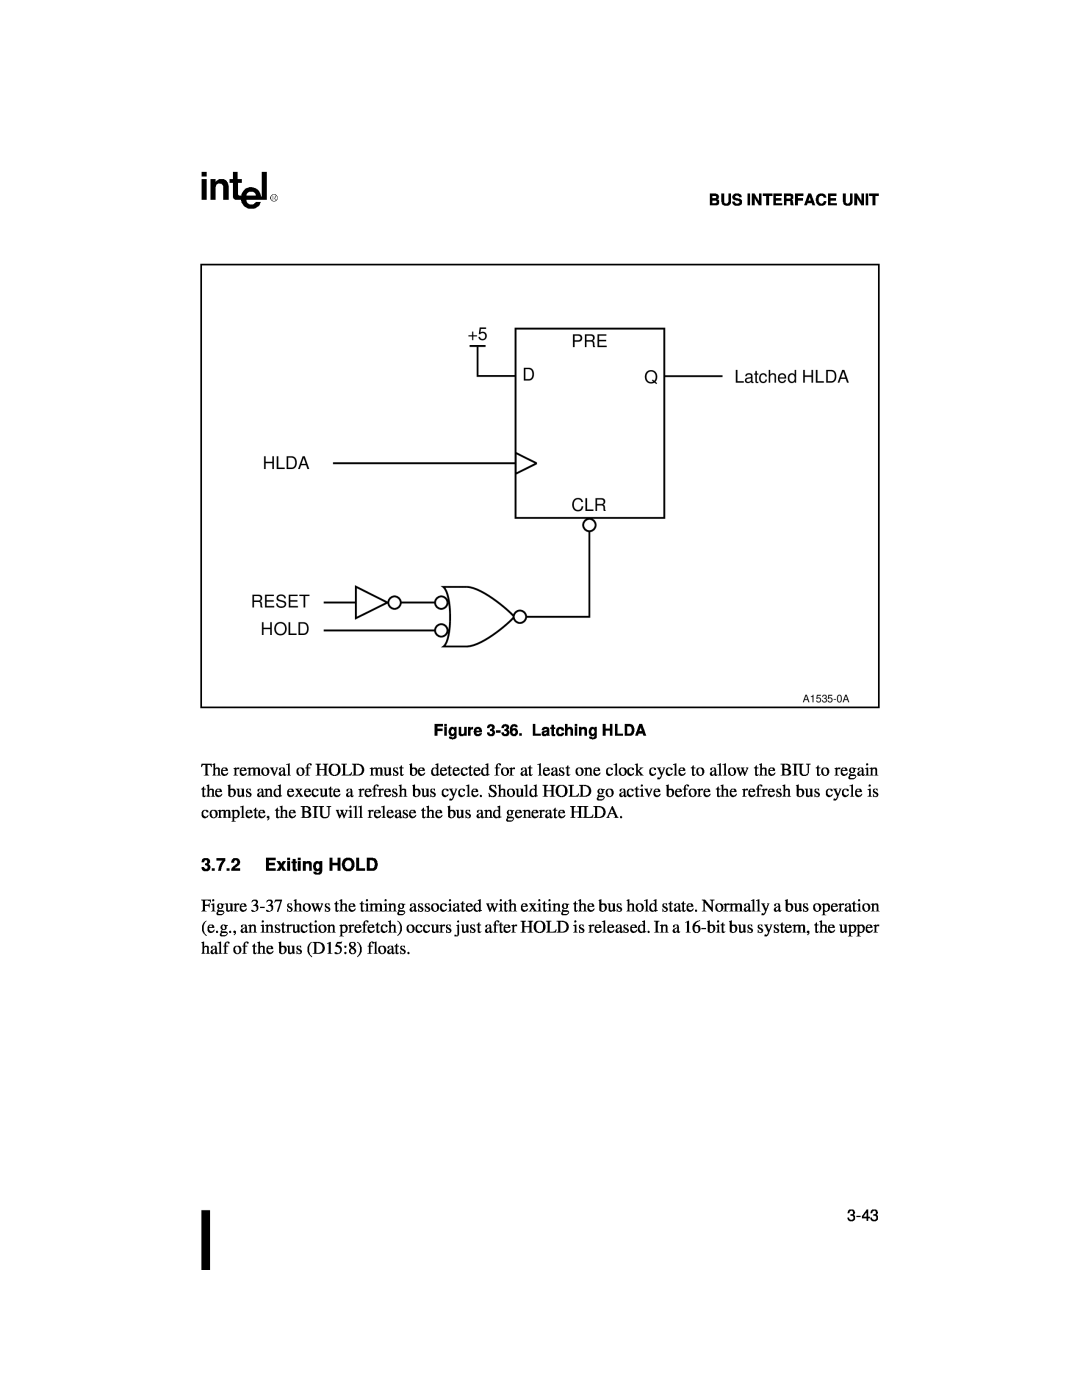 Intel 80C188XL, 80C186XL user manual 3.7.2Exiting HOLD, +5 HLDA RESET HOLD, Pre Dq Clr, Latched HLDA 